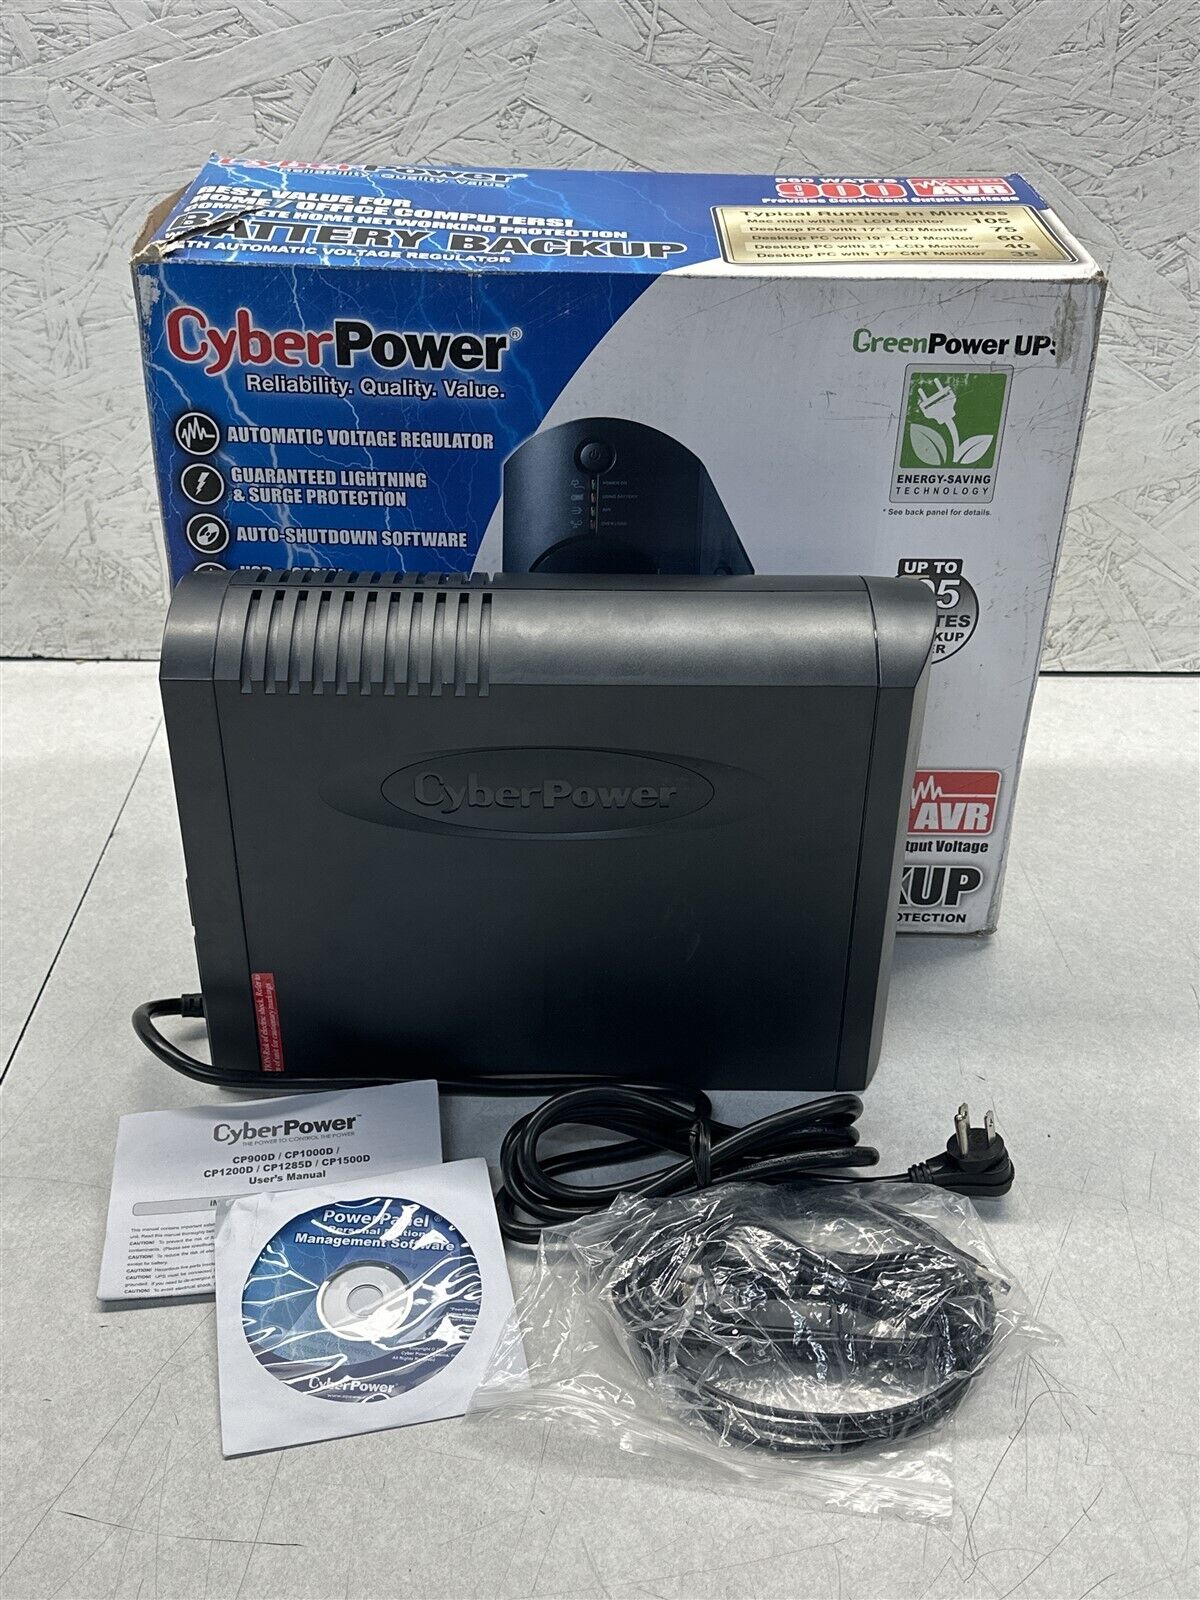 CYBER POWER 900VA 8-OUTLET UNINTERRUPTABLE POWER SUPPLY CP900AVR NEW OPEN BOX